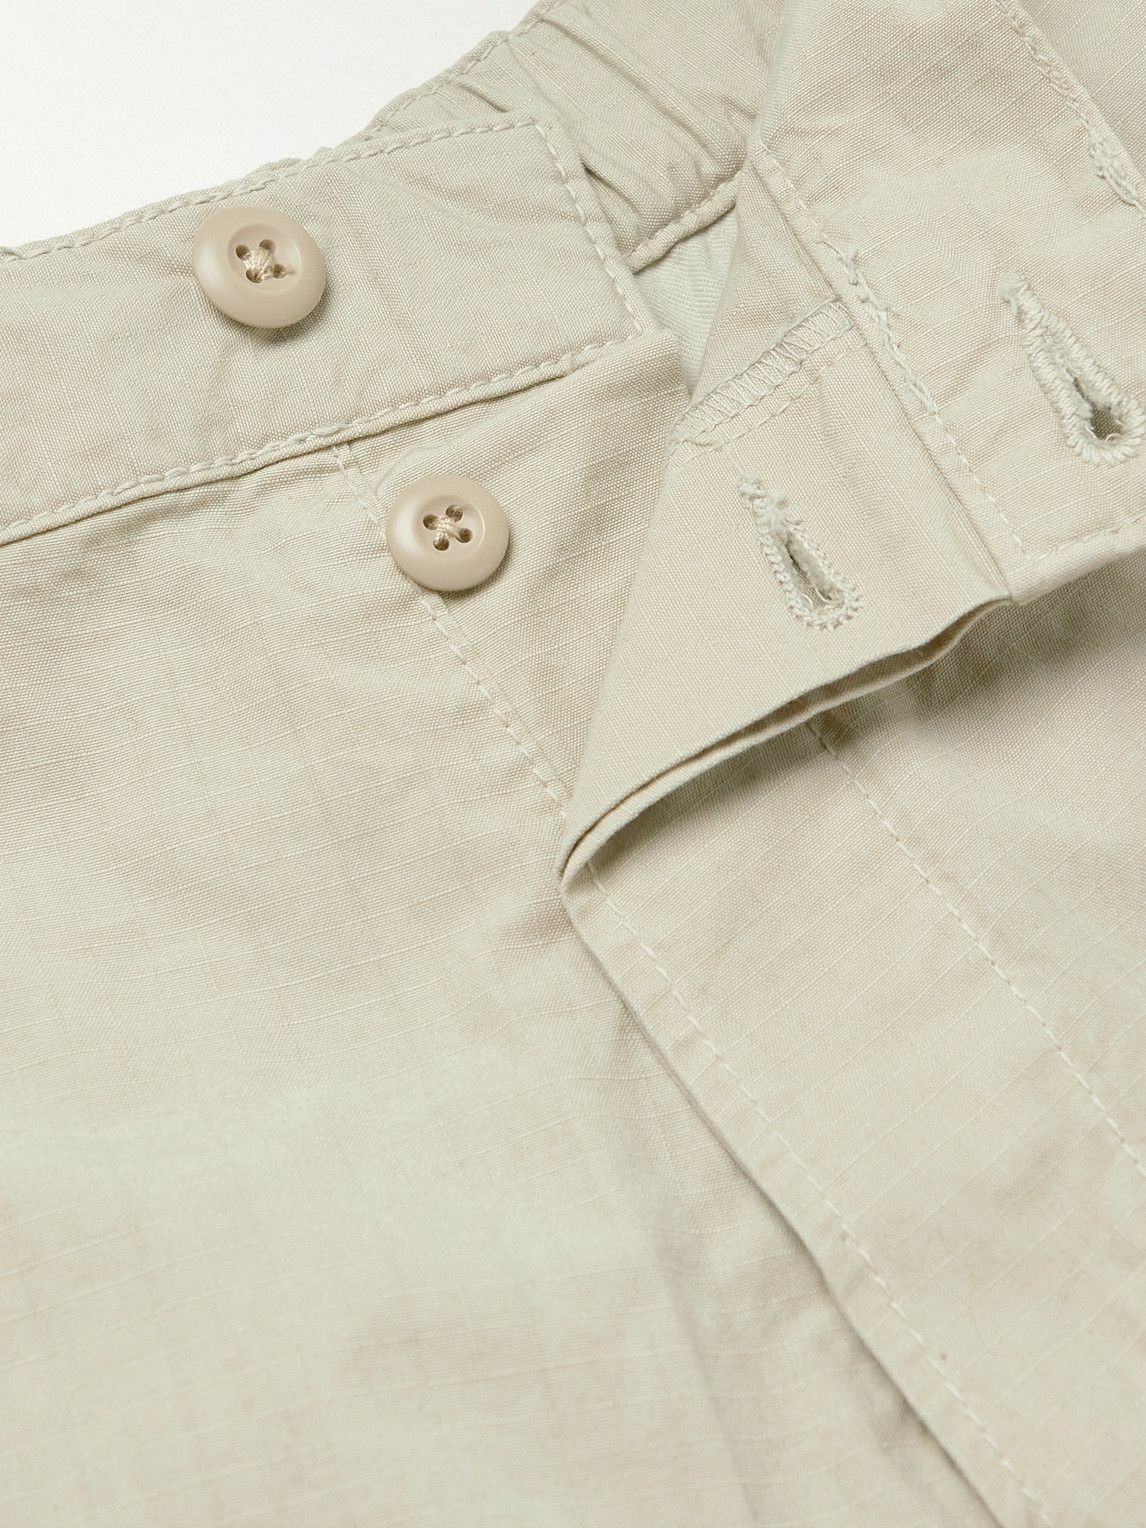 EDWIN - Sentinel Tapered Garment-Dyed Cotton-Ripstop Cargo Trousers ...